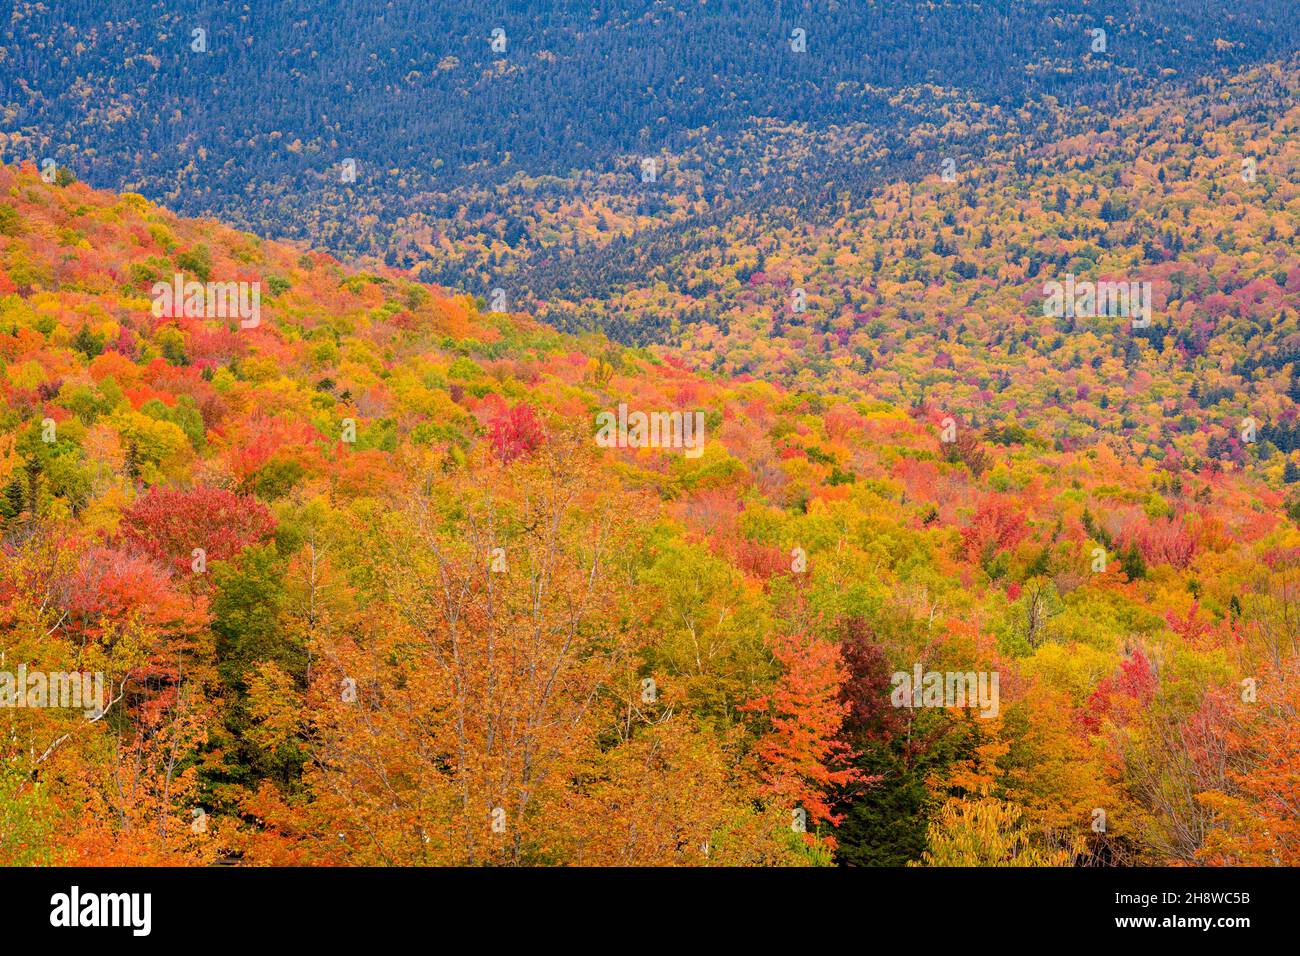 Autumn foliage in the deciduous forest on New England hillsides, Mount Washington Valley, New Hampshire, USA Stock Photo